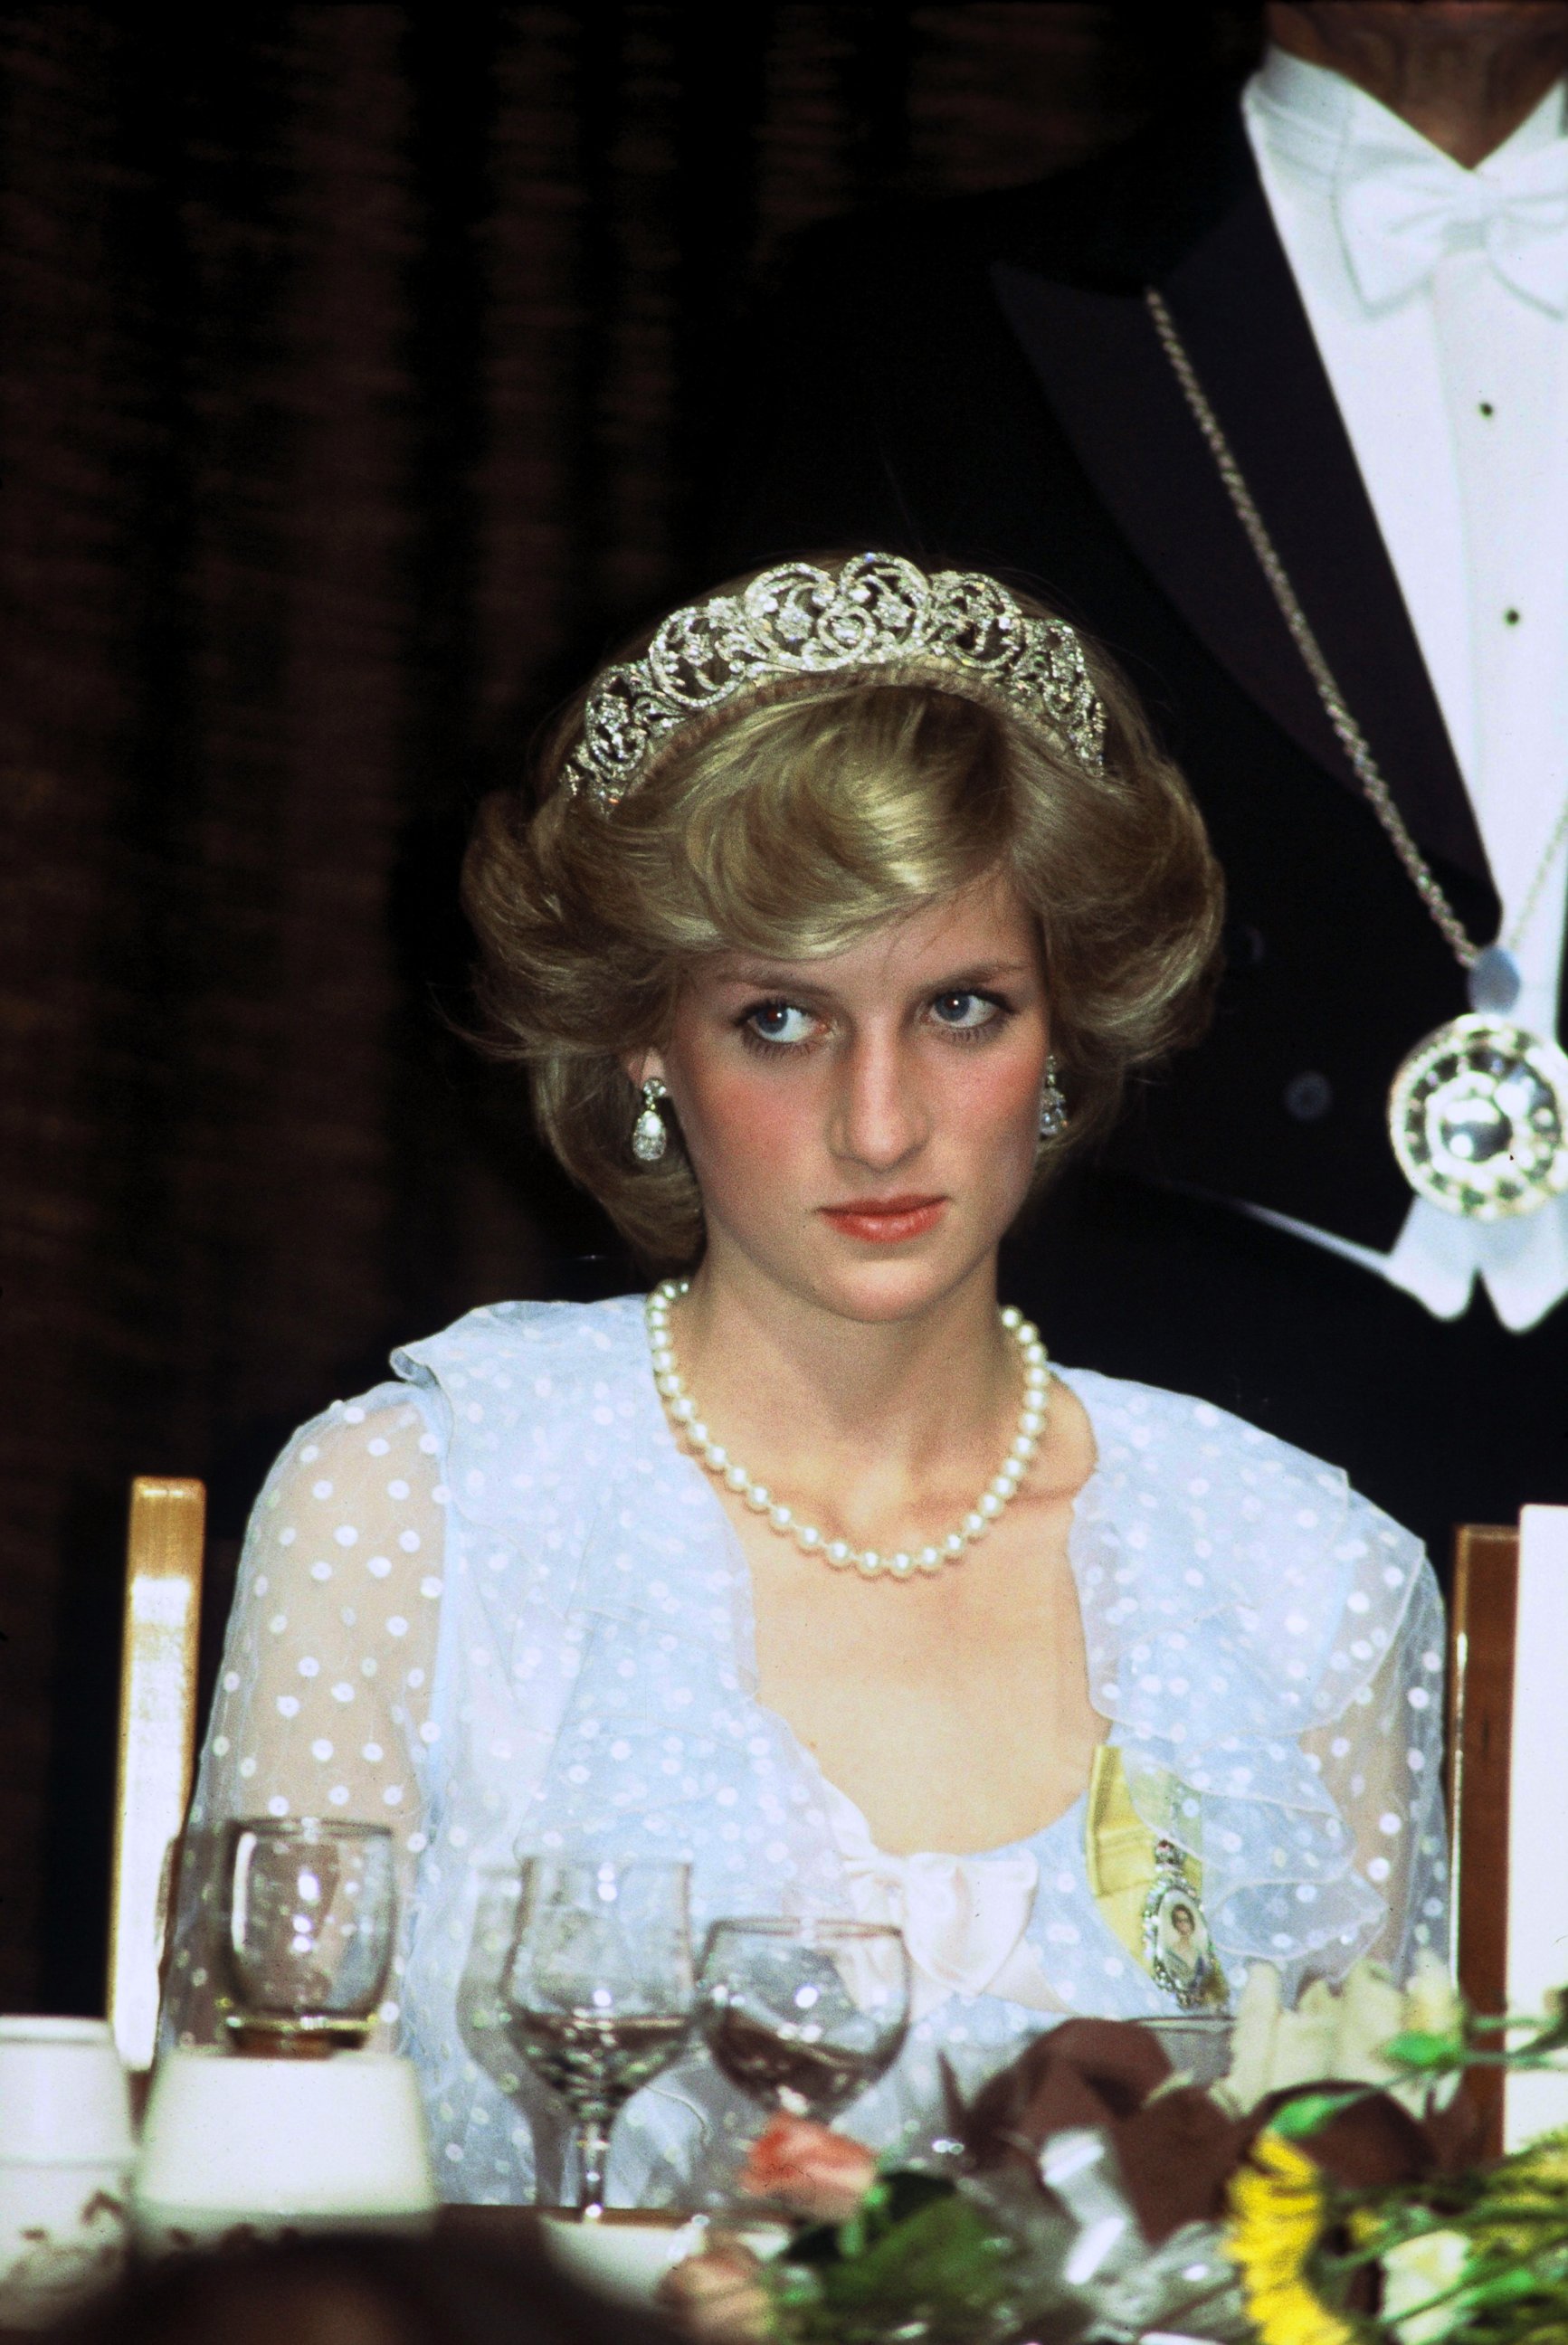 PHOTO: Diana Princess of Wales attends a banquet on April 20, 1983 in New Zealand.  